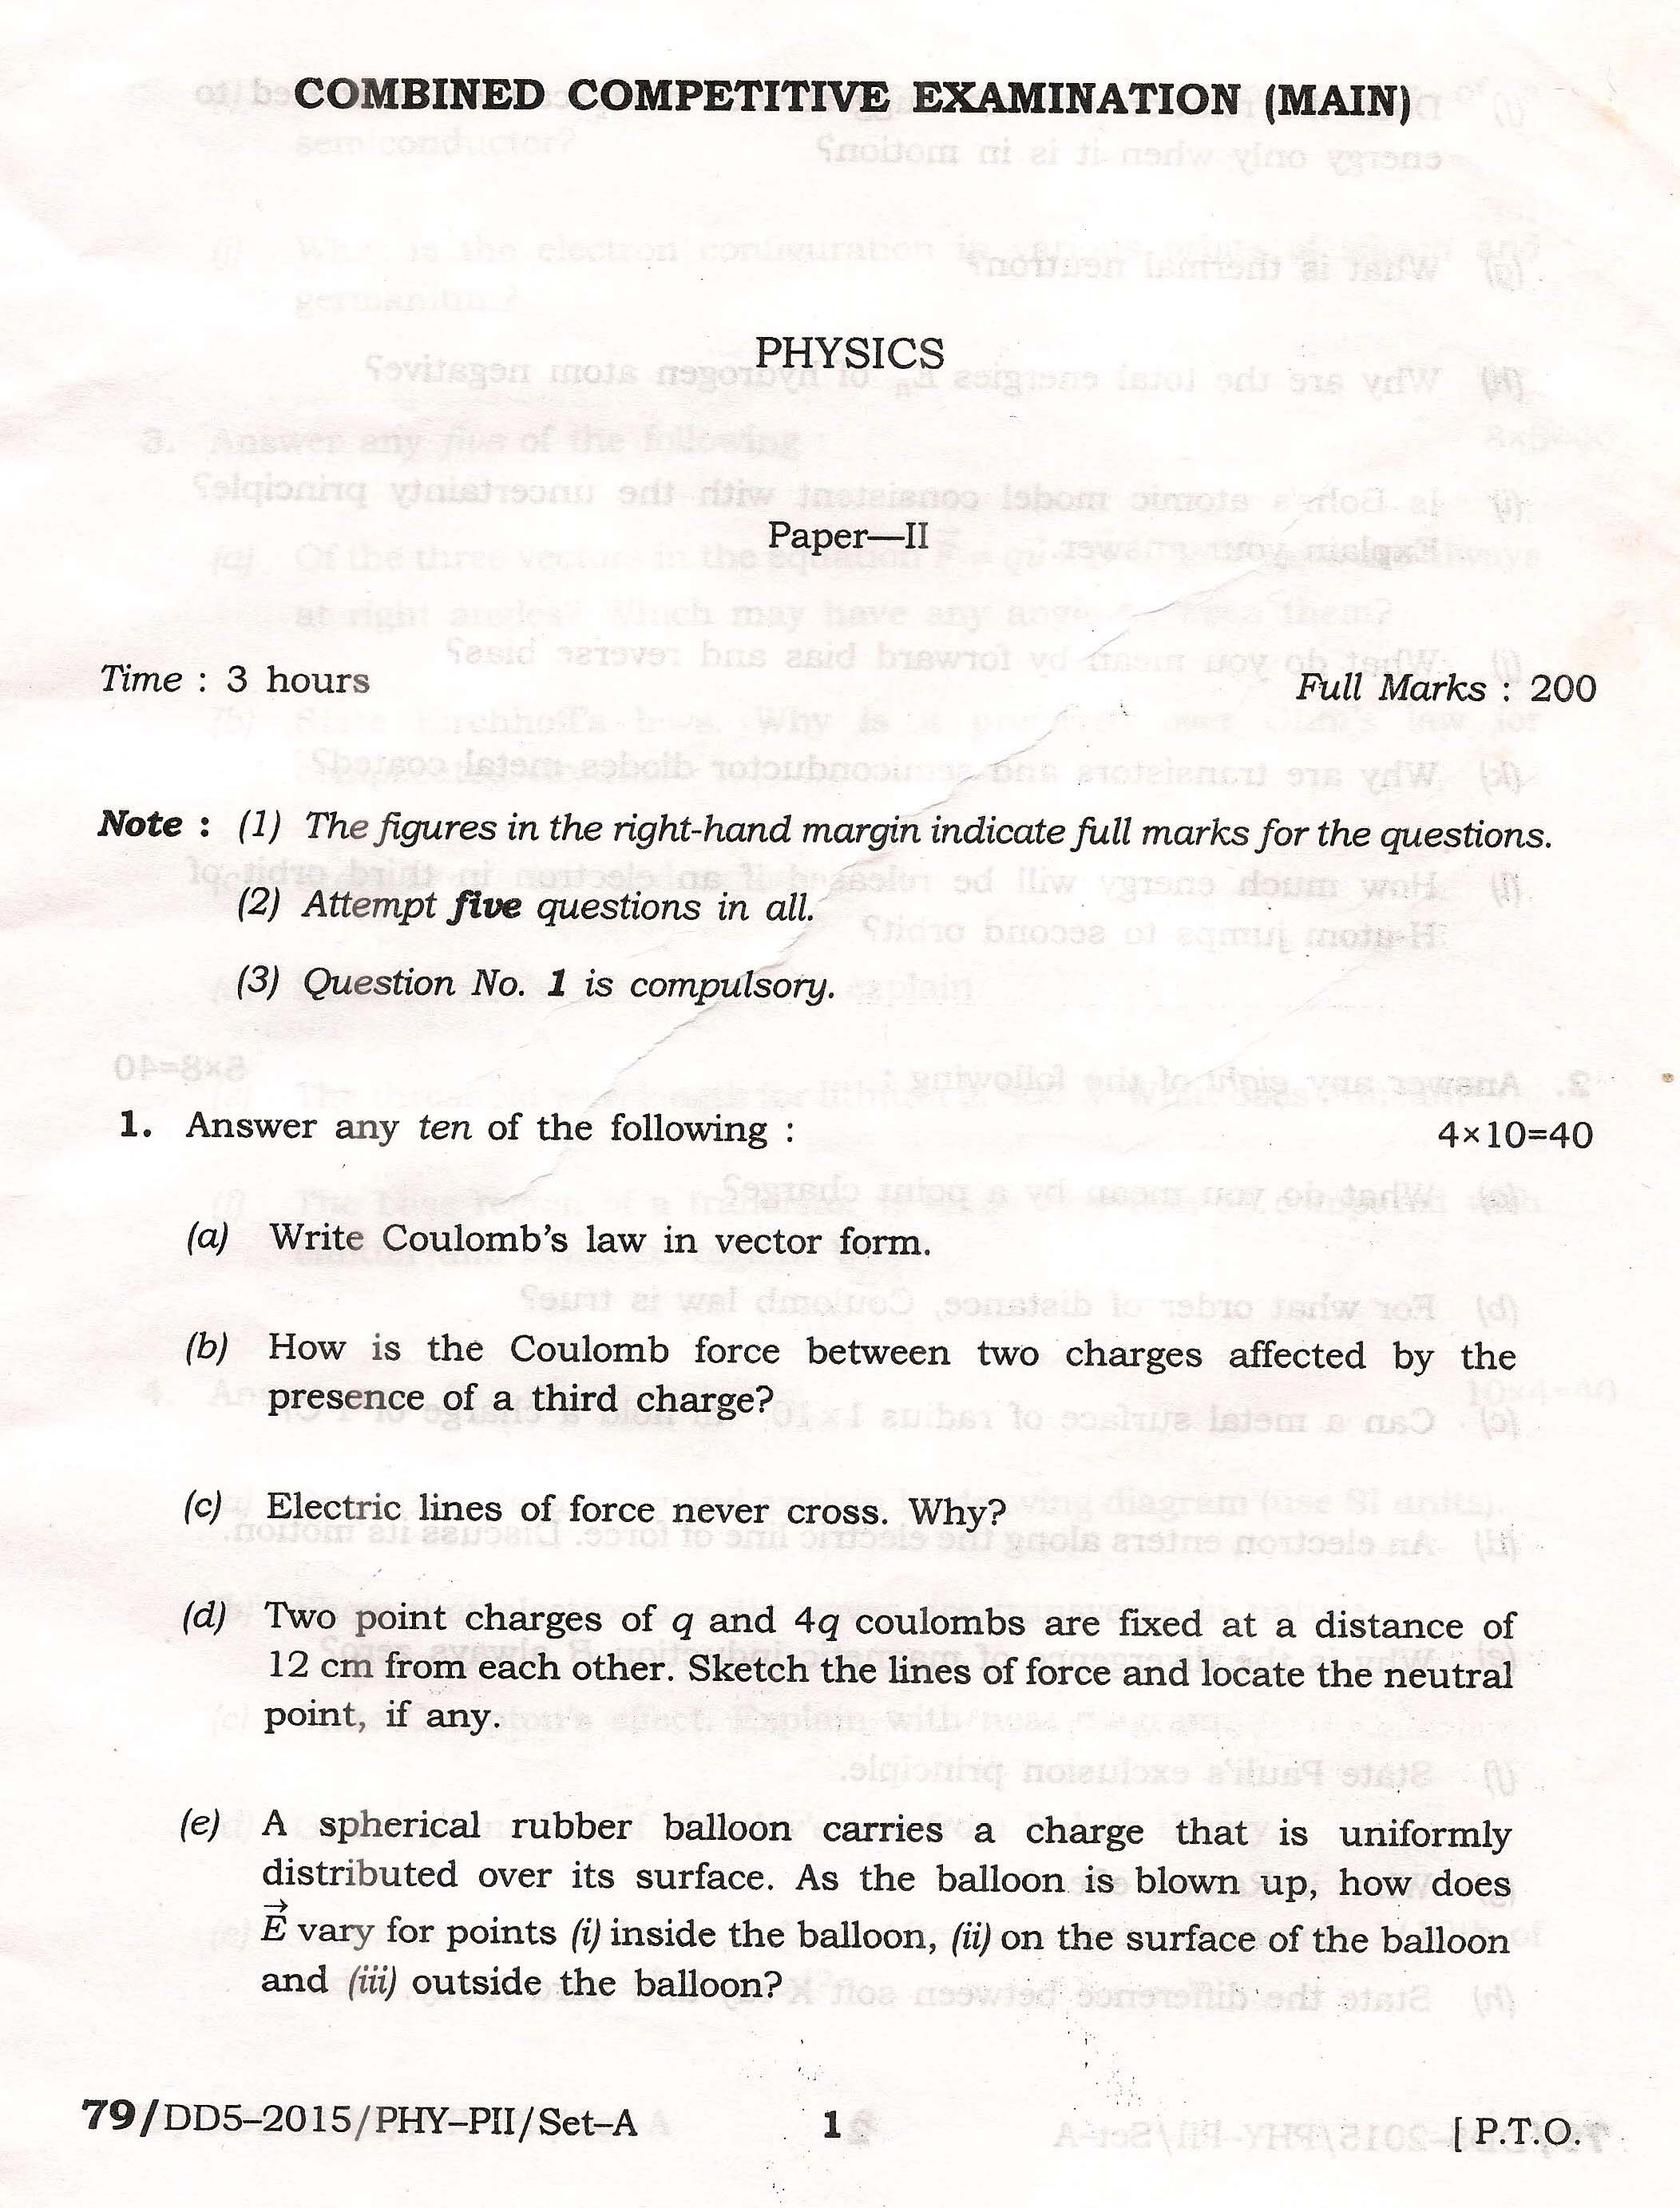 APPSC Combined Competitive Main Exam 2015 Physics Paper II 1